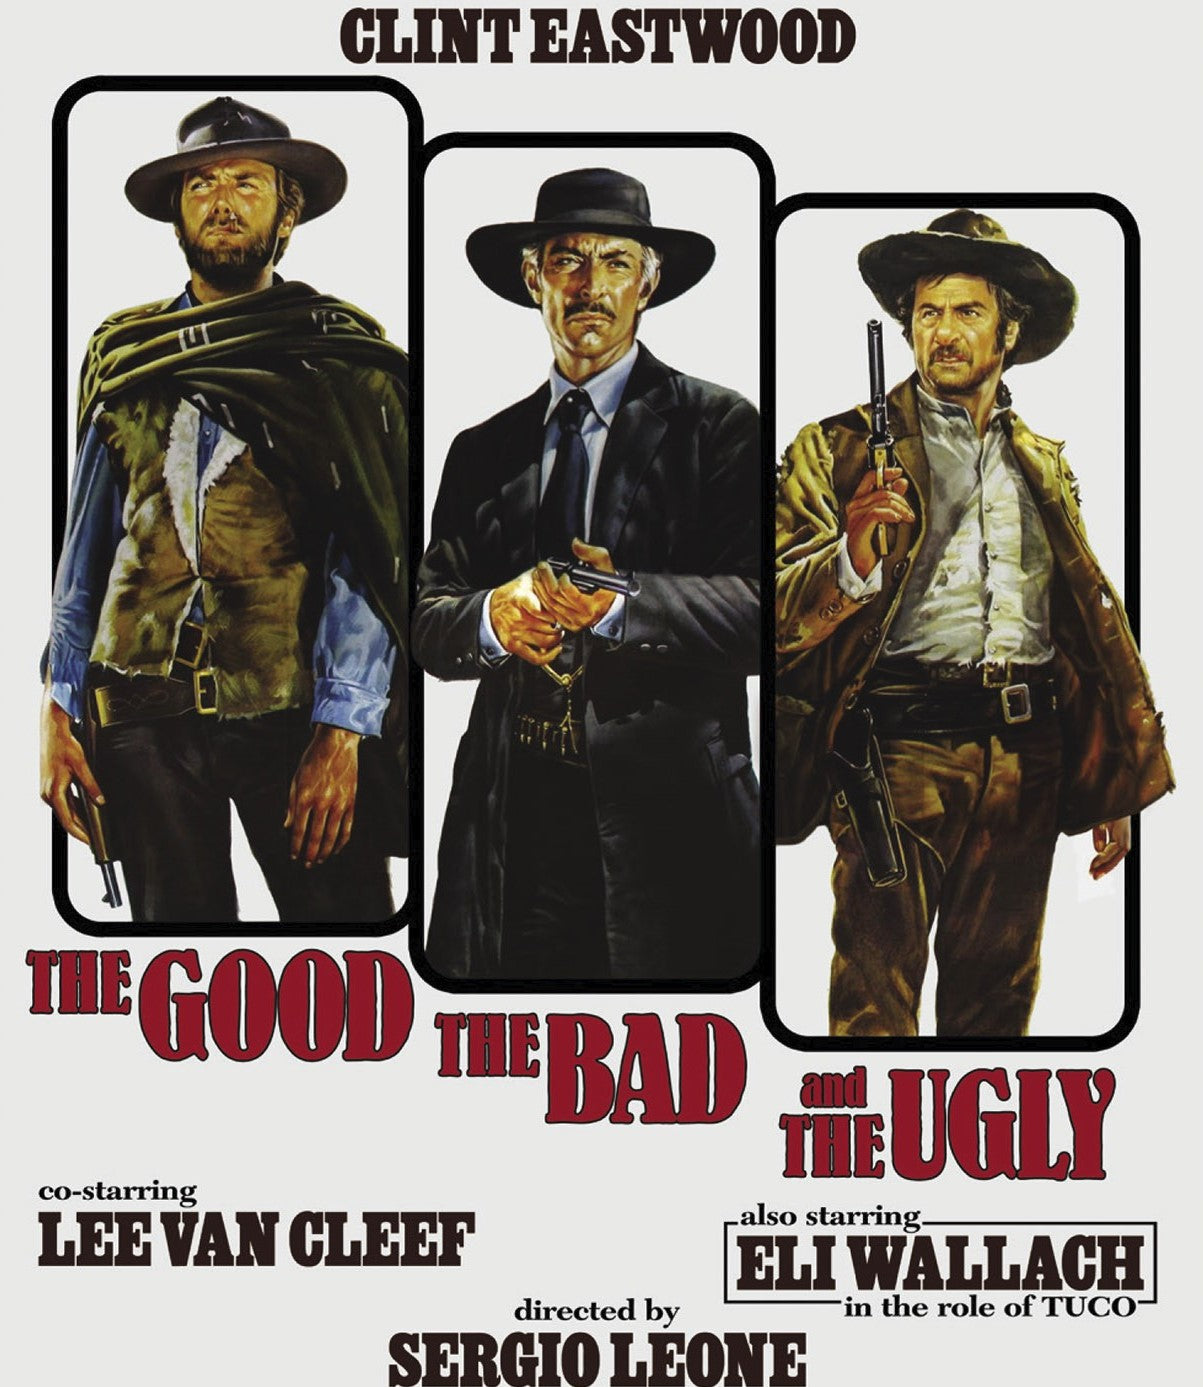 THE GOOD, THE BAD AND THE UGLY 4K UHD/BLU-RAY